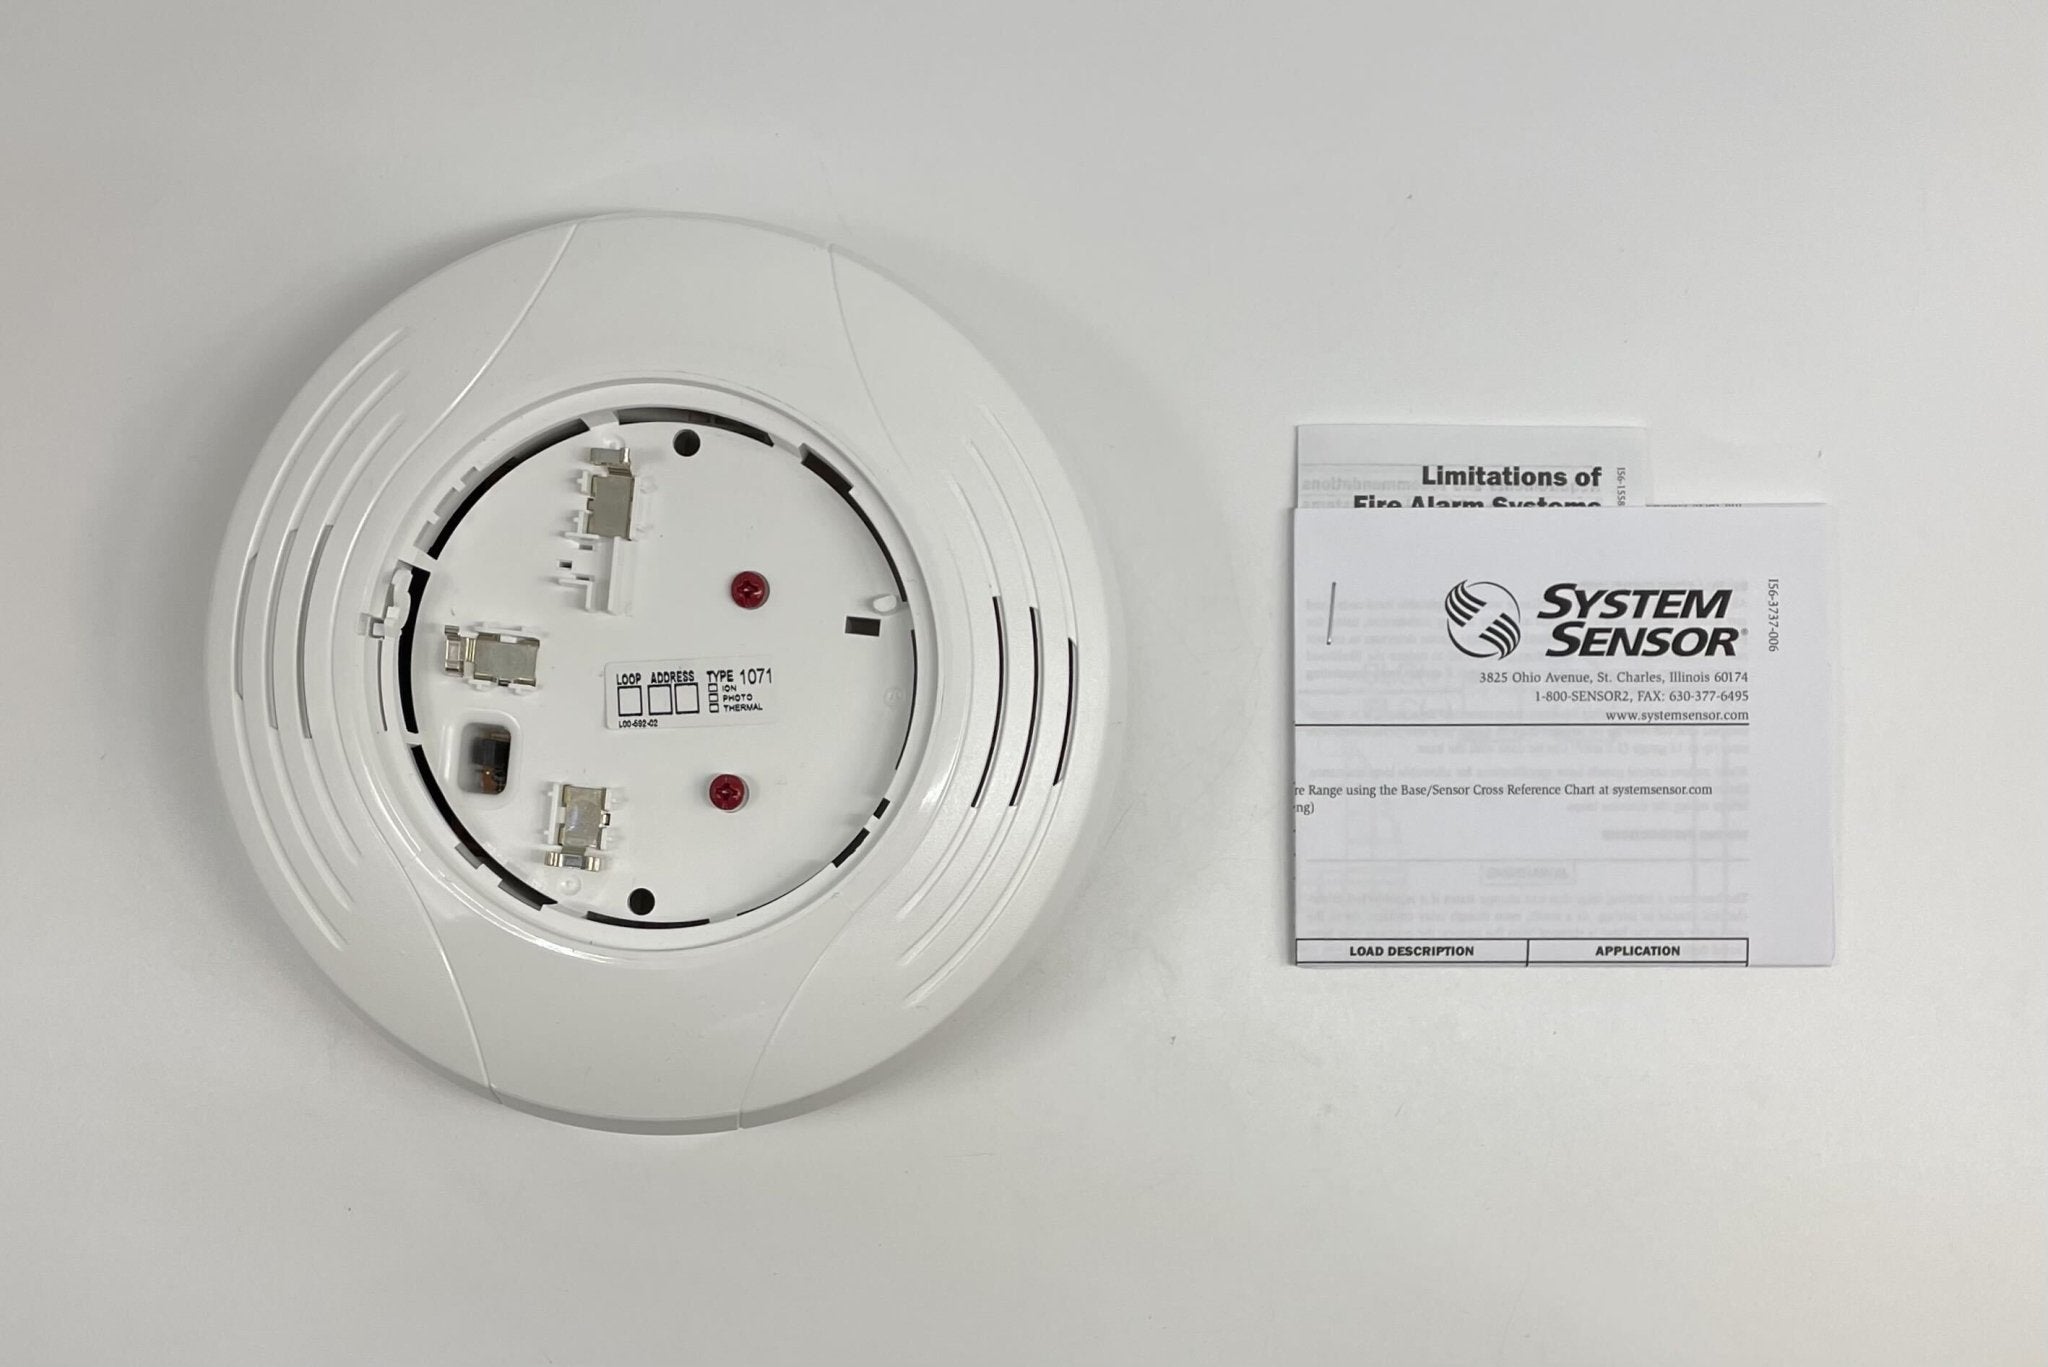 System Sensor B224RB-WH - The Fire Alarm Supplier